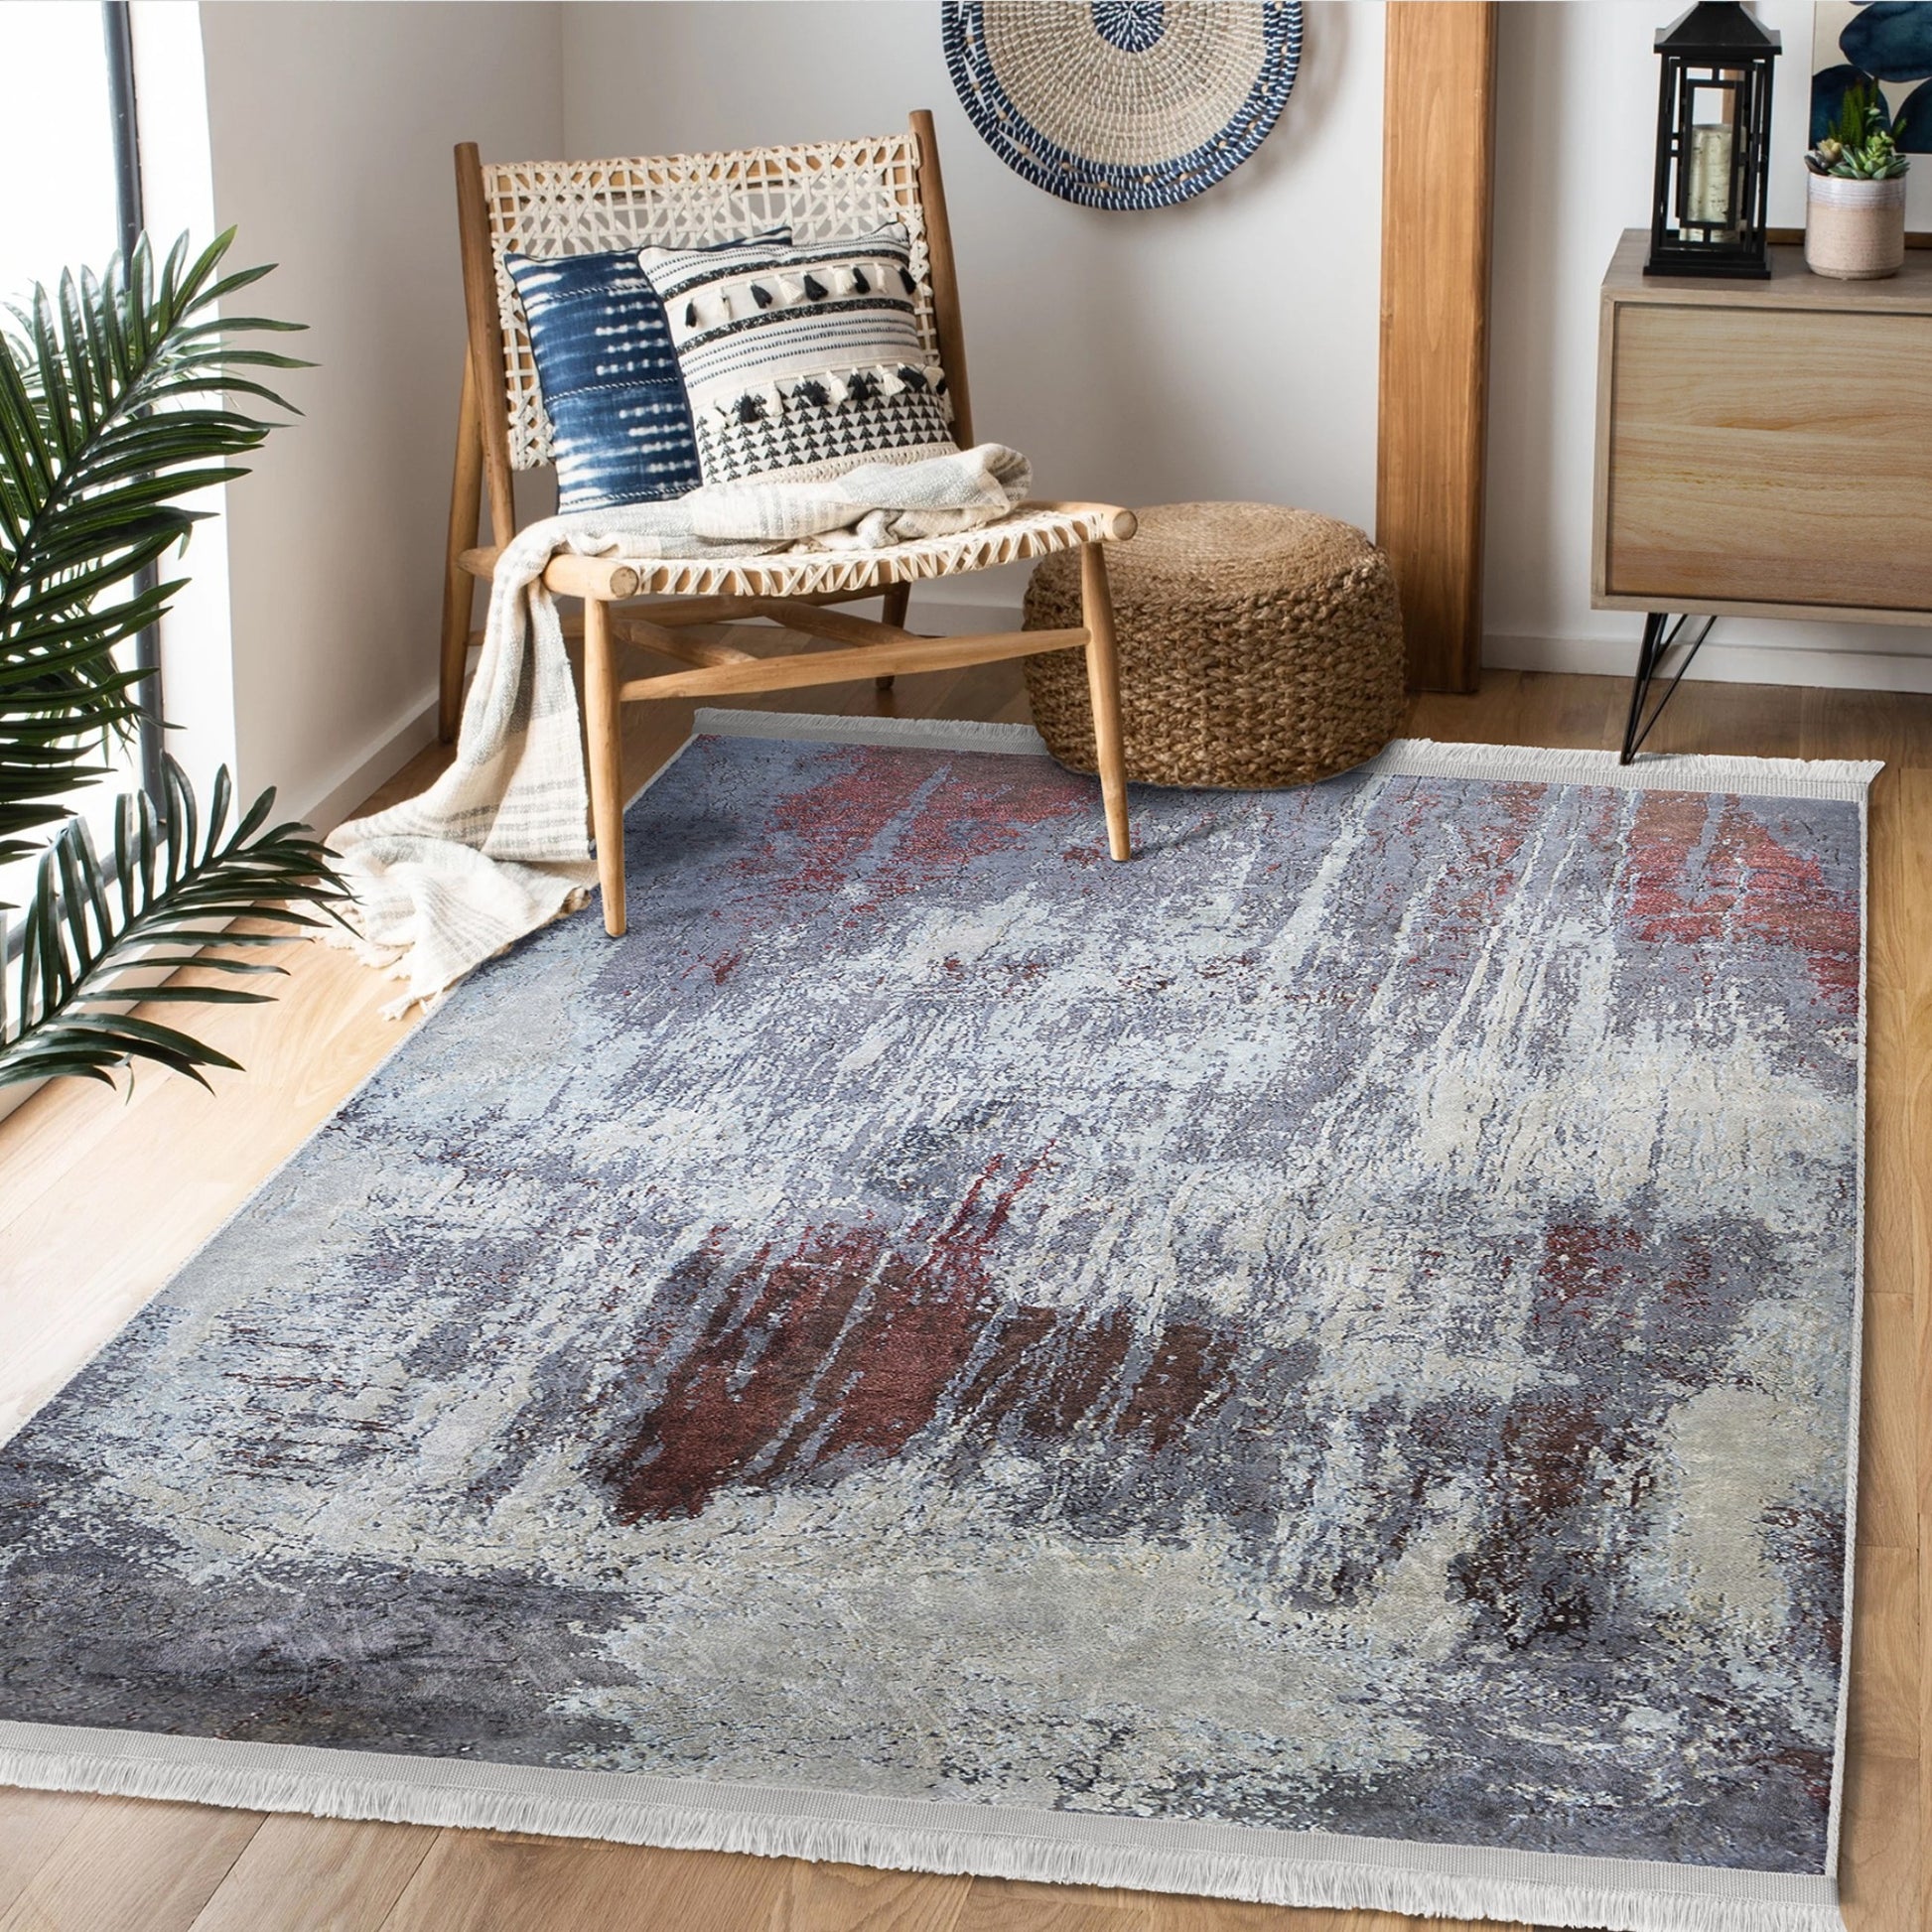 Inviting Rug with Rustic Decor Pattern